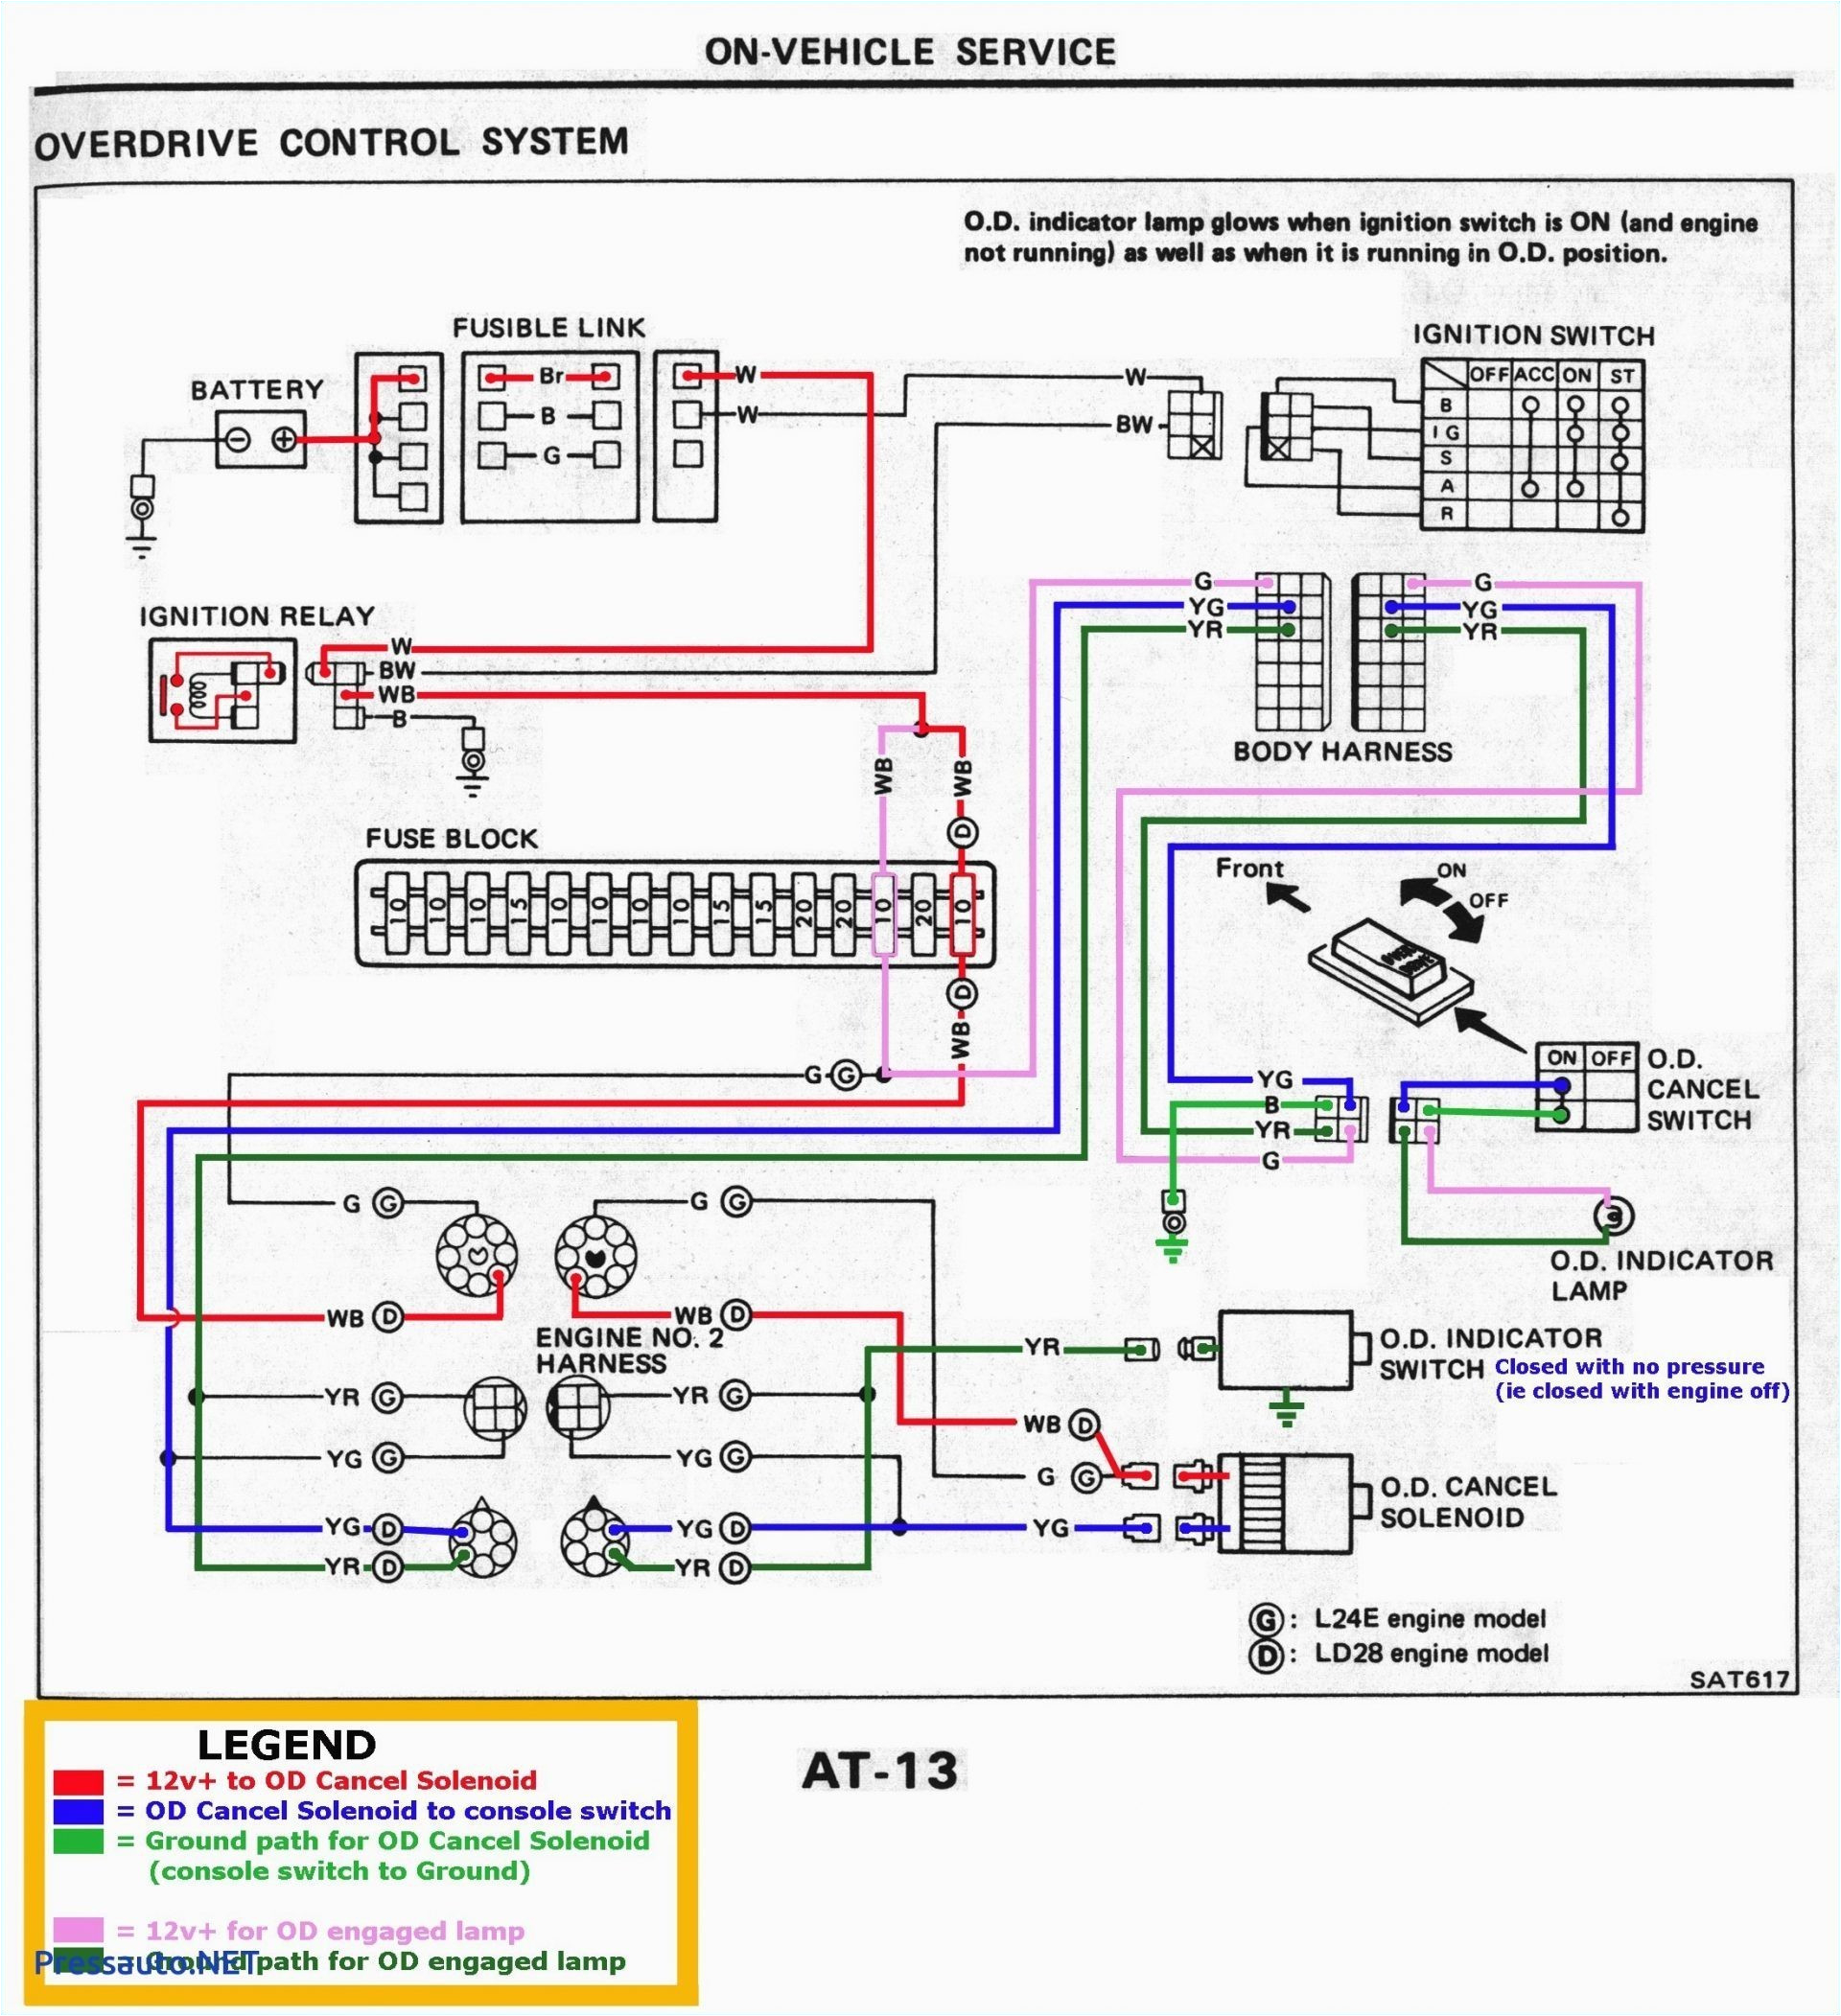 chevy 6 0 wiring harness wiring diagram today chevy 6 0 engine diagram